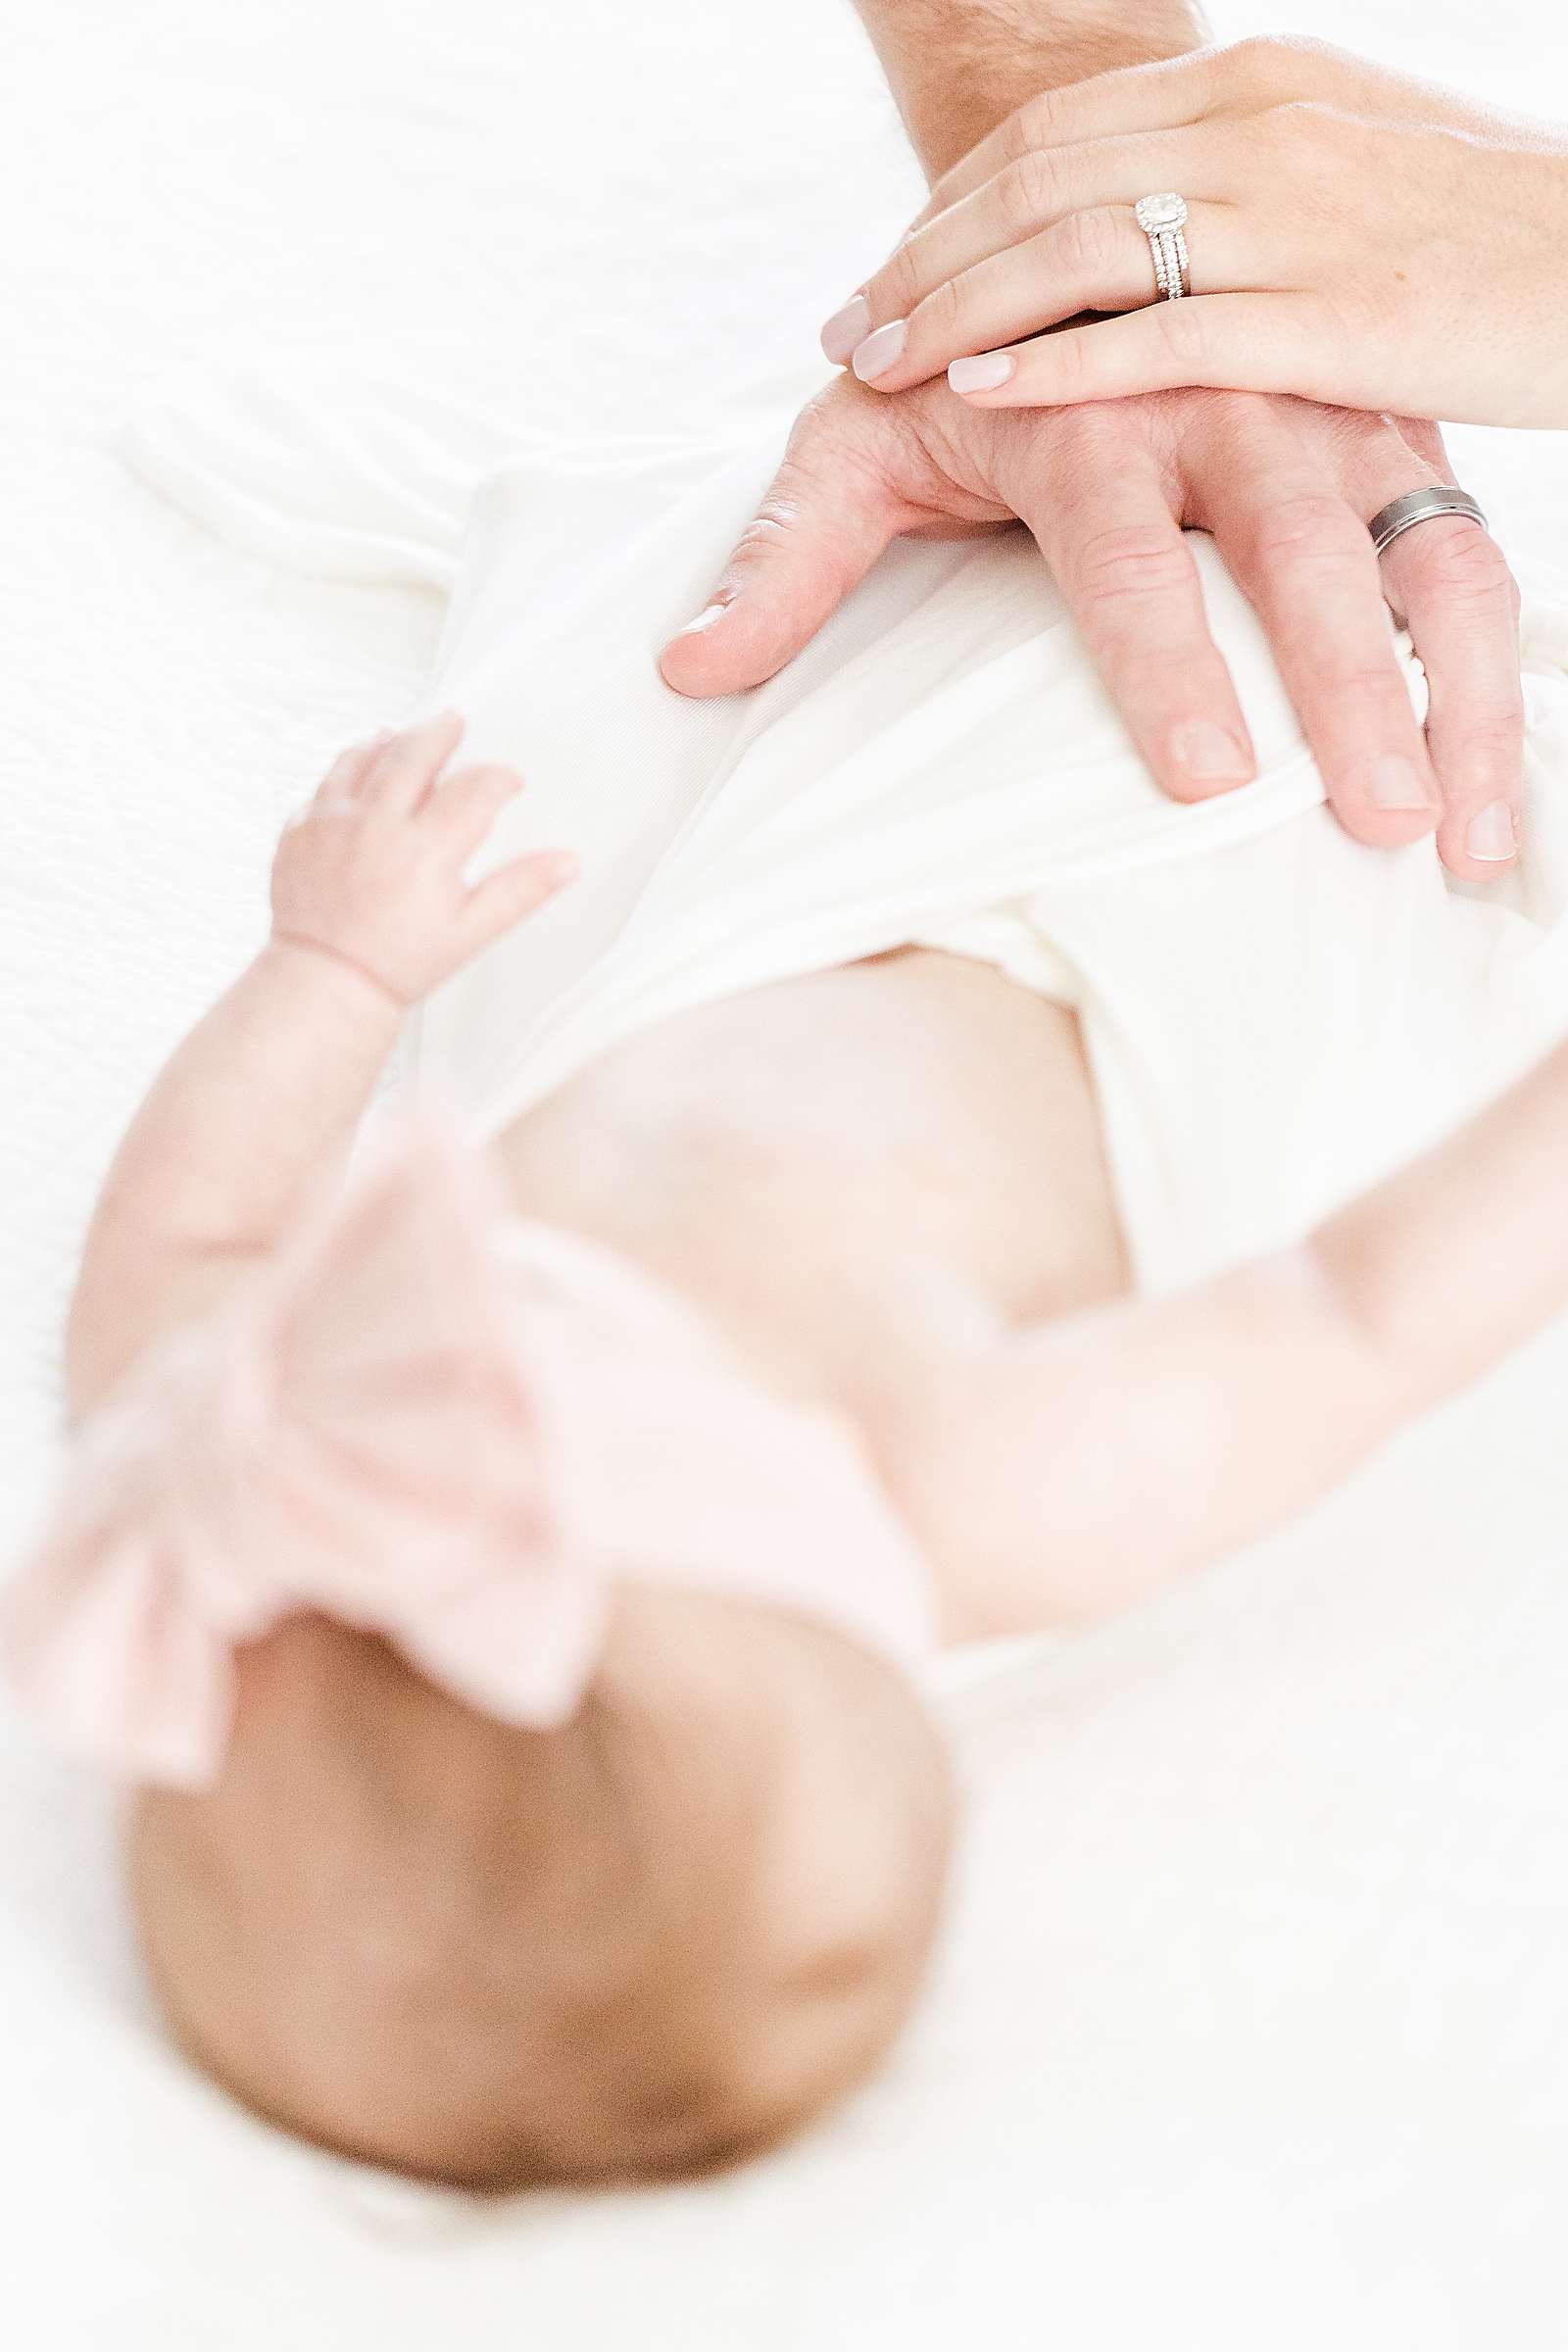 mom and dads hands together on top of baby with hands and wedding rings in focus and baby out of focus